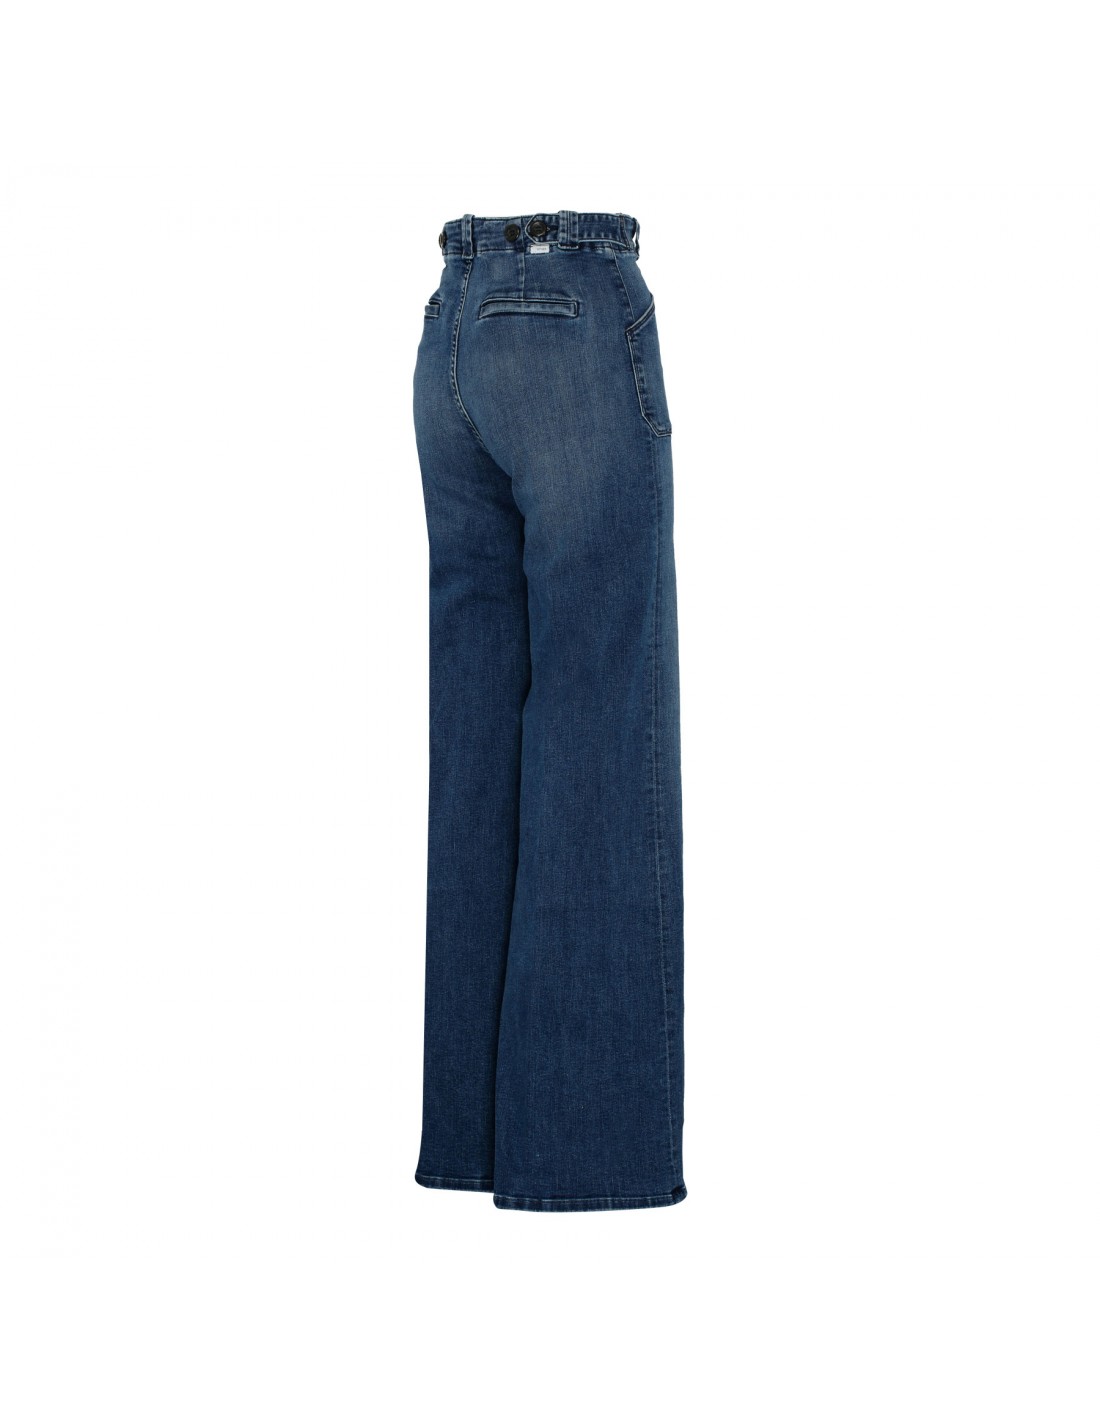 The Elbow Grease Roller Sneak jeans